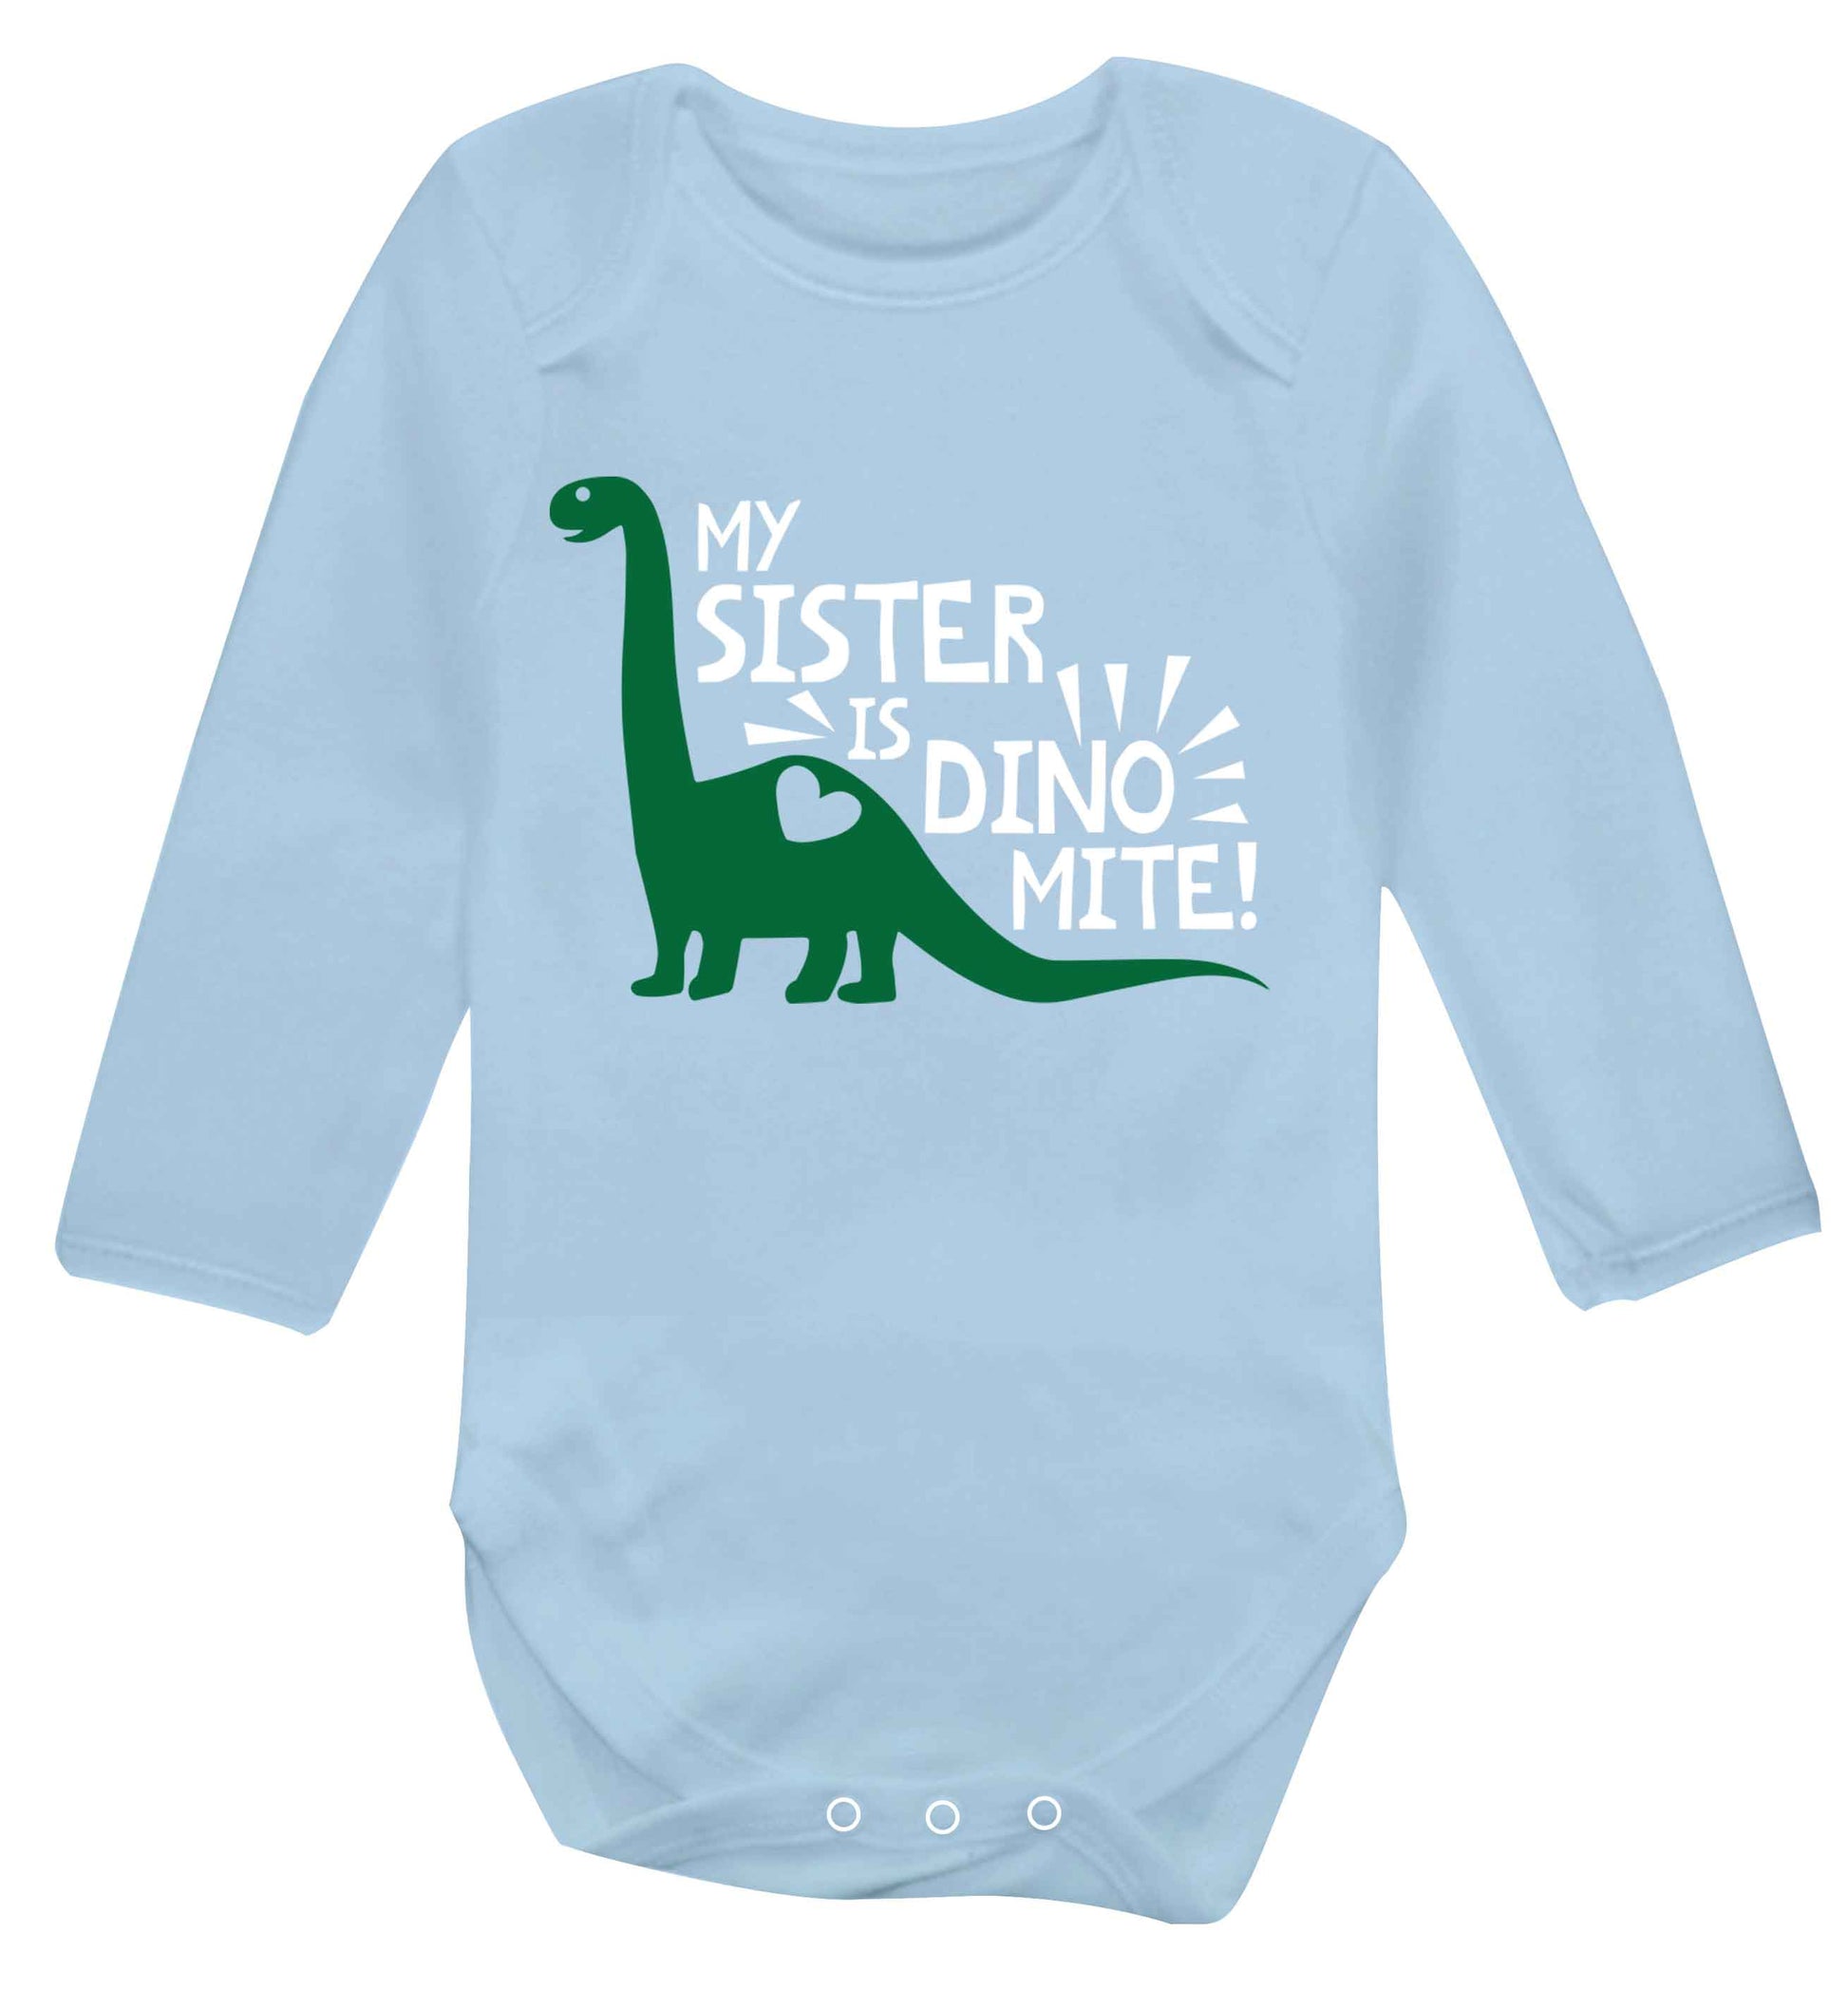 My sister is dinomite! Baby Vest long sleeved pale blue 6-12 months